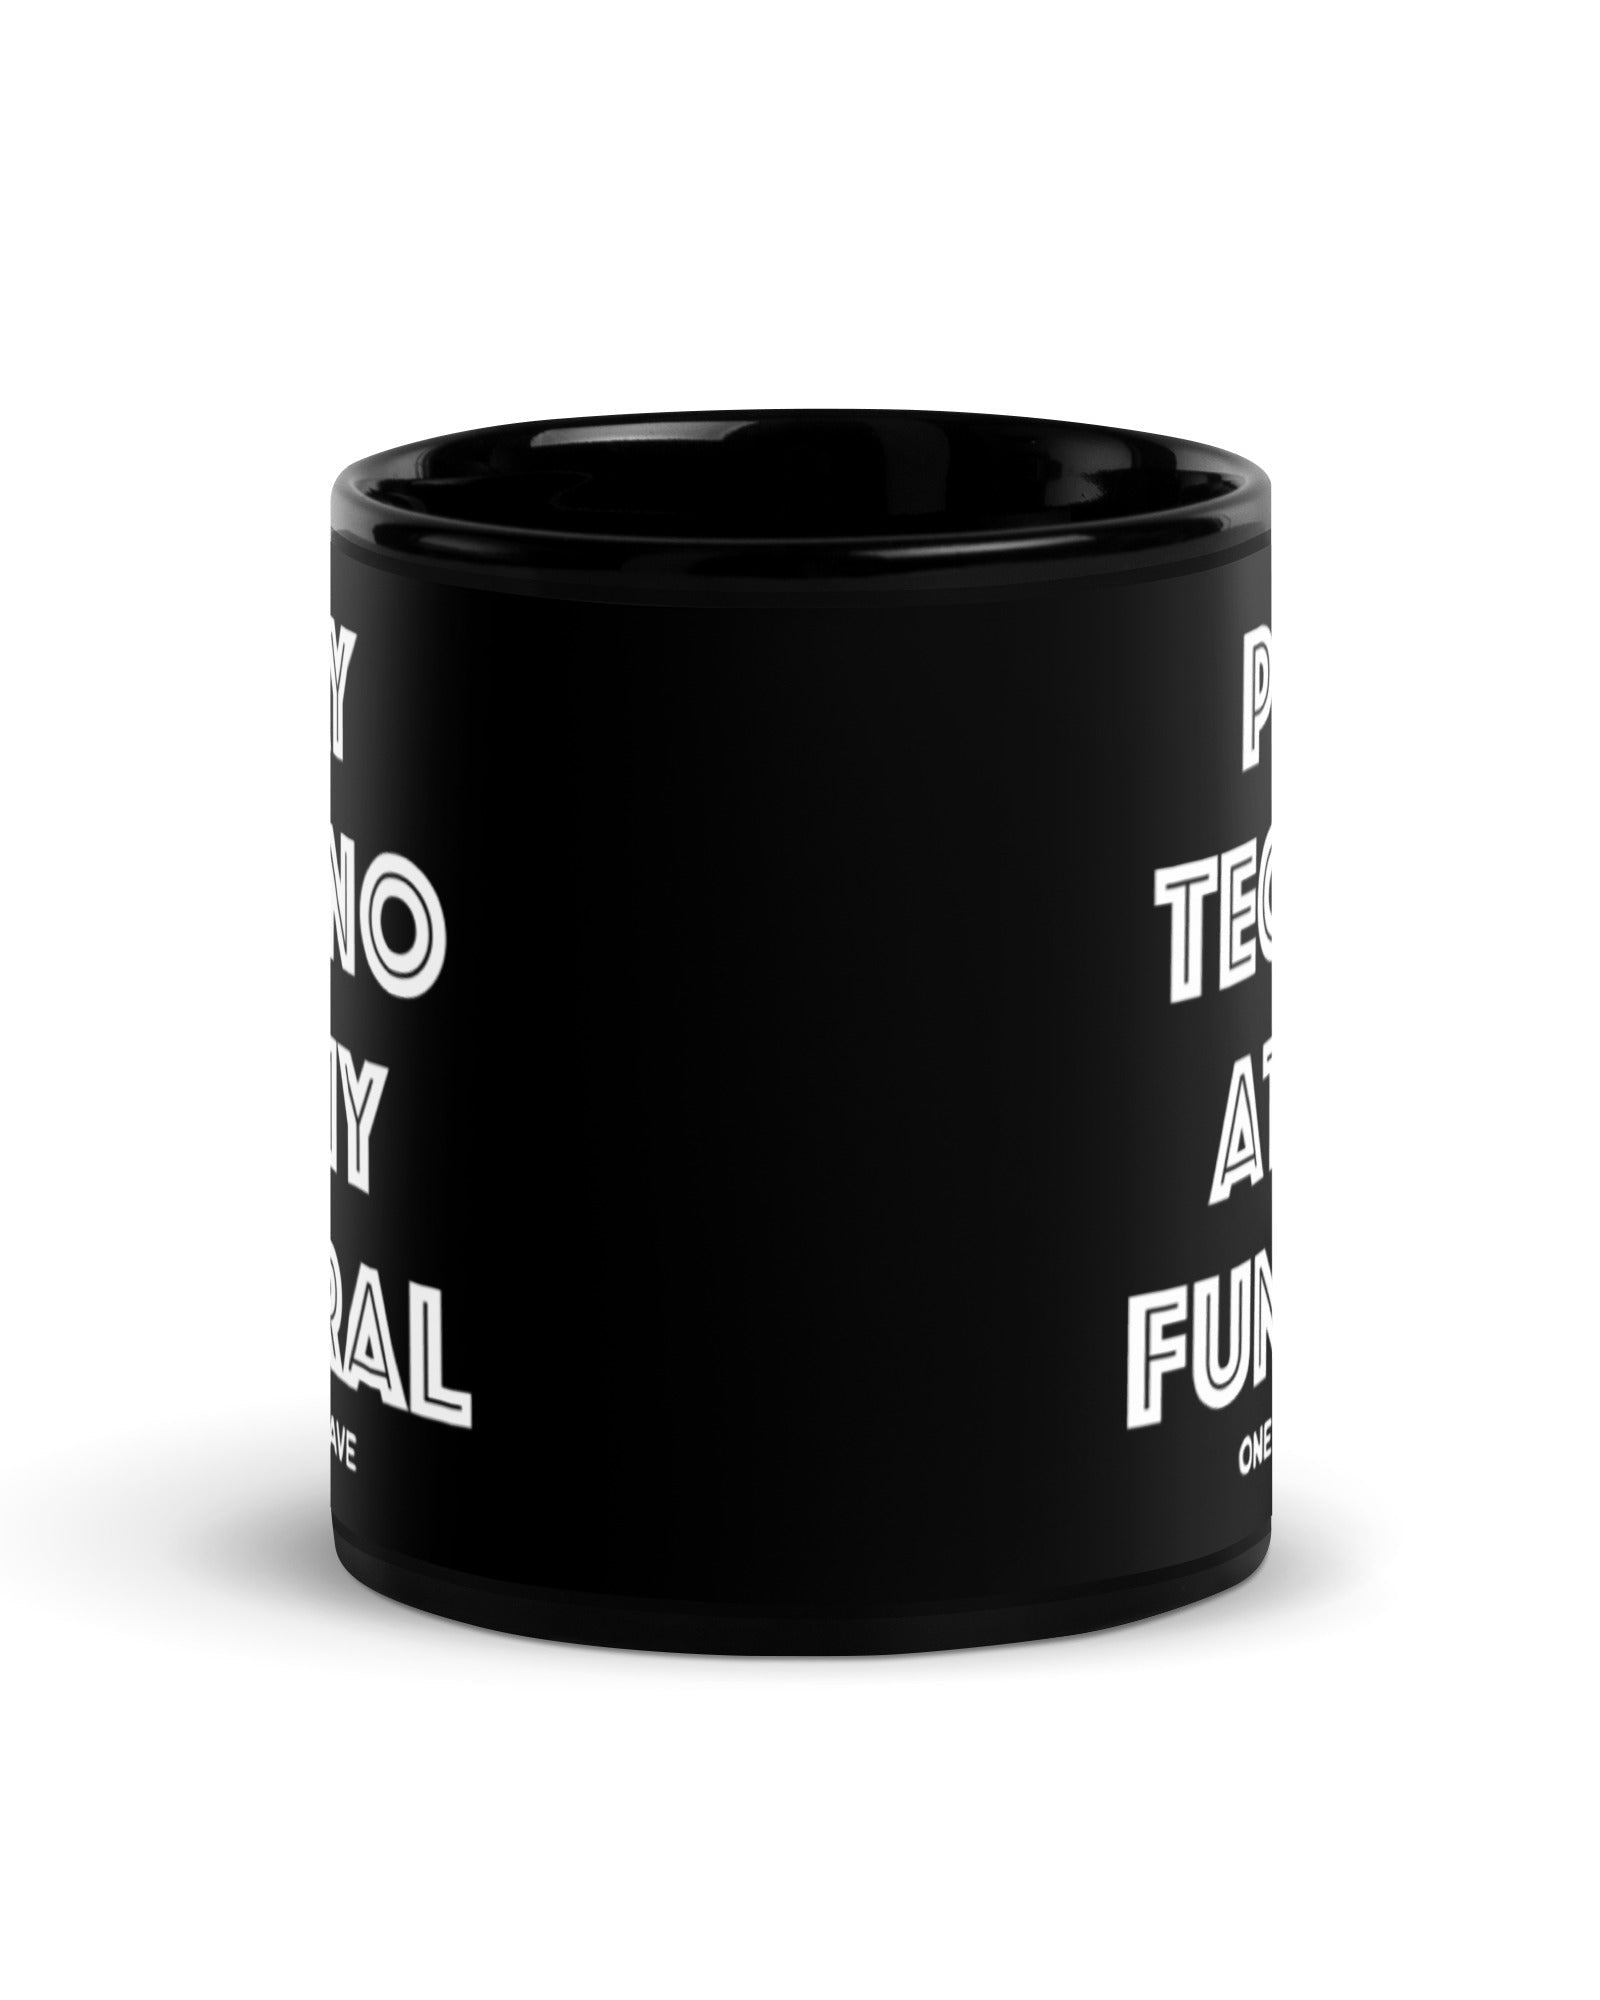 Play Techno At My Funeral Mug, , - One Stop Rave